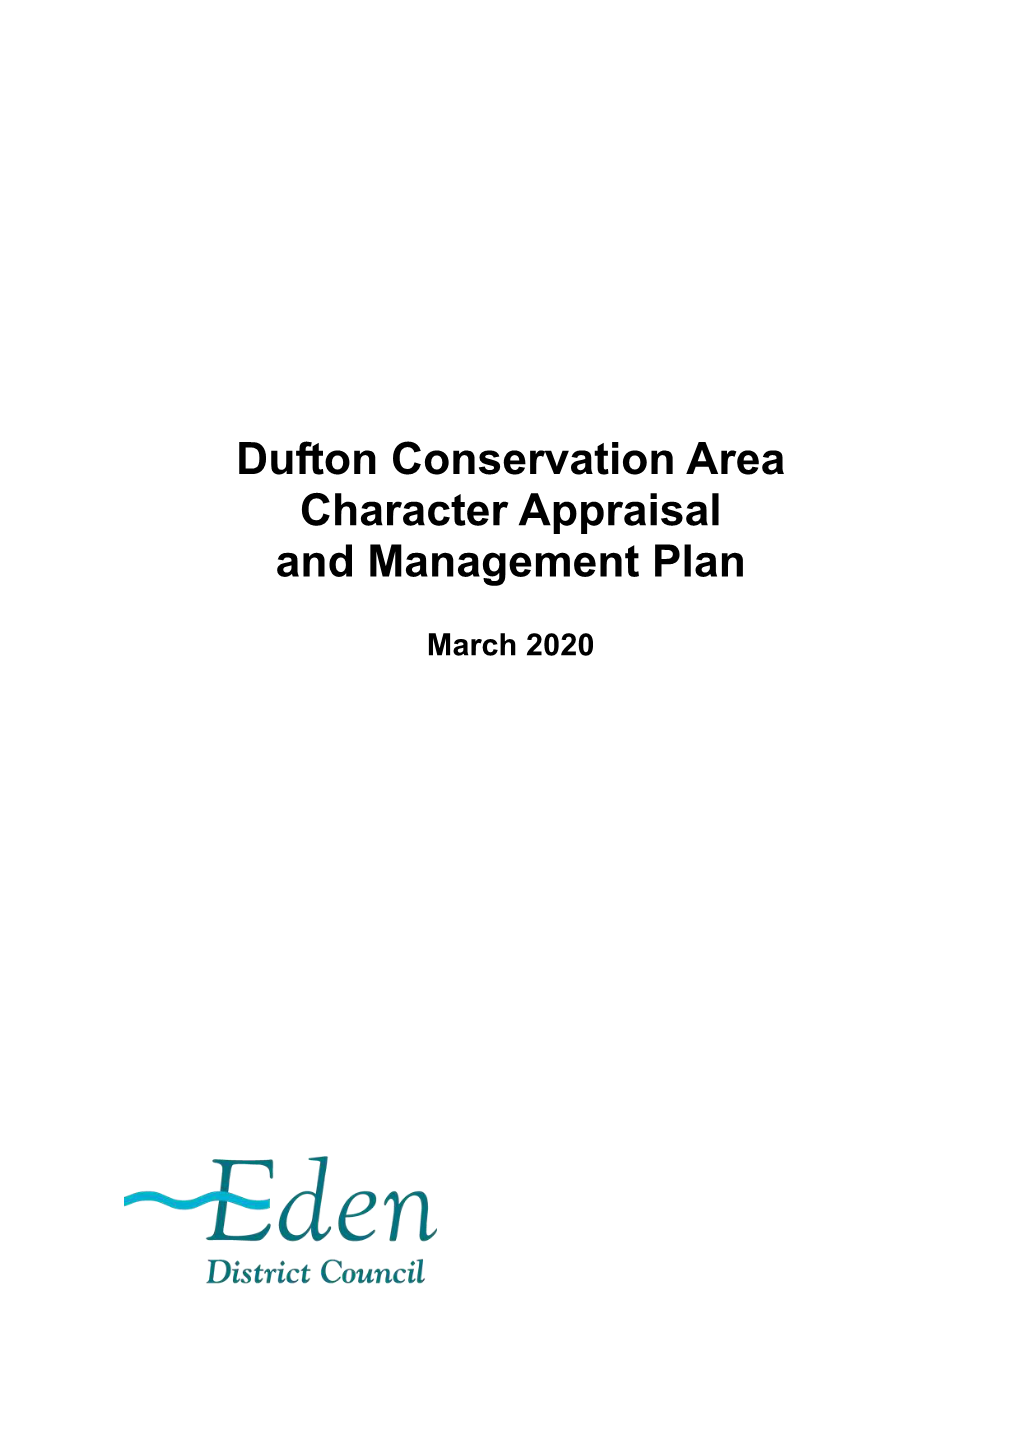 Read the Dufton Conservation Area Character Appraisal